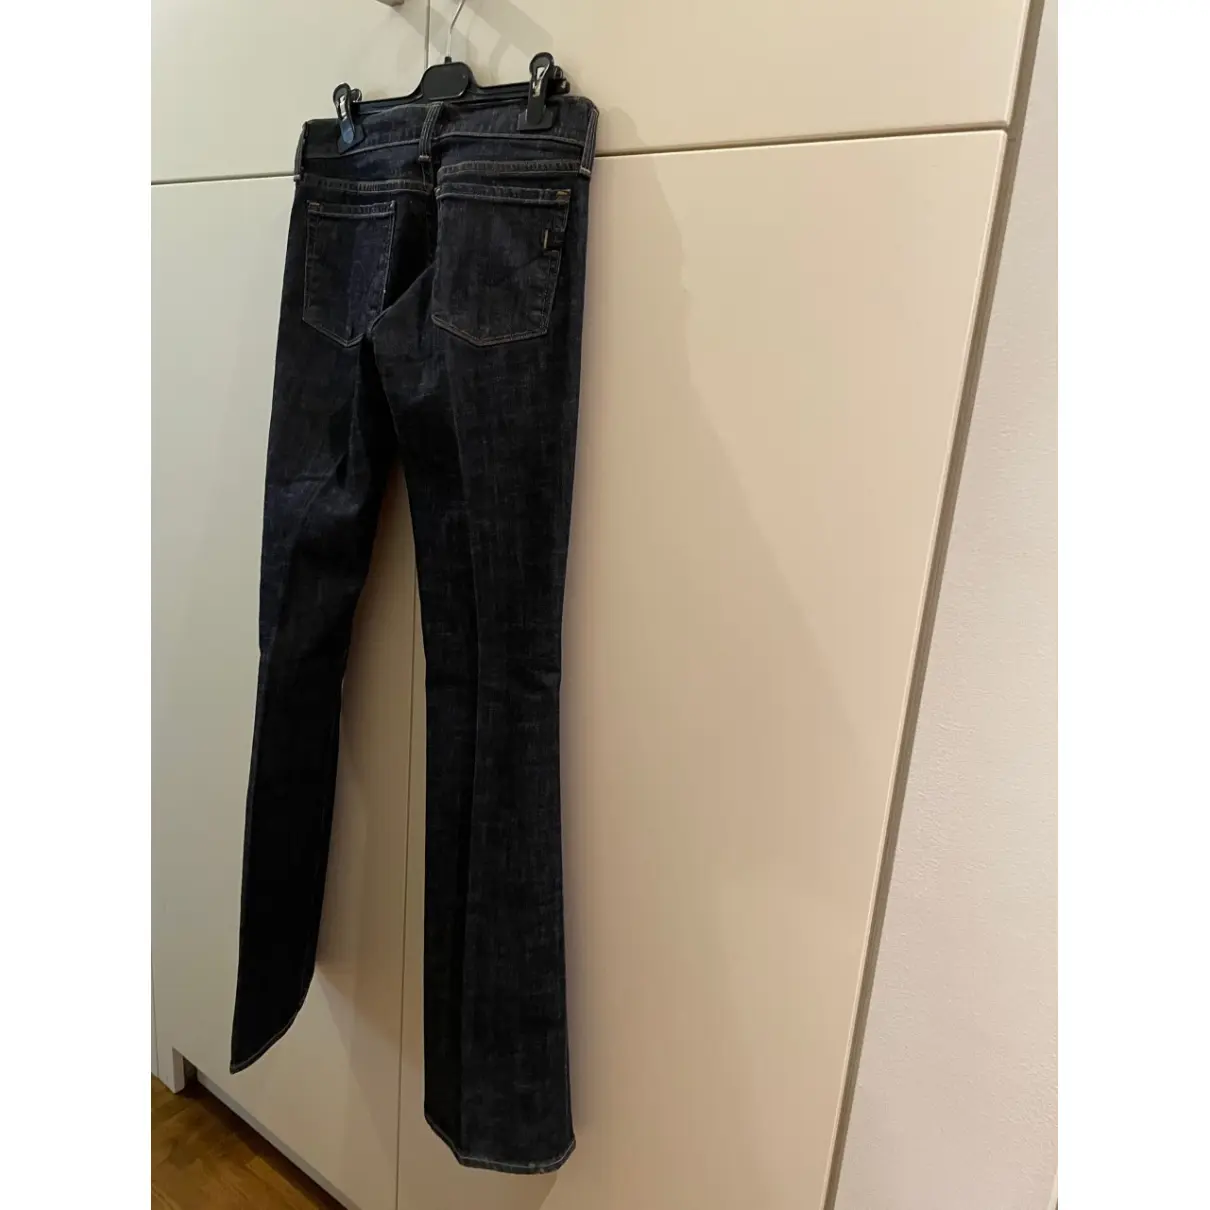 Buy Citizens Of Humanity Bootcut jeans online